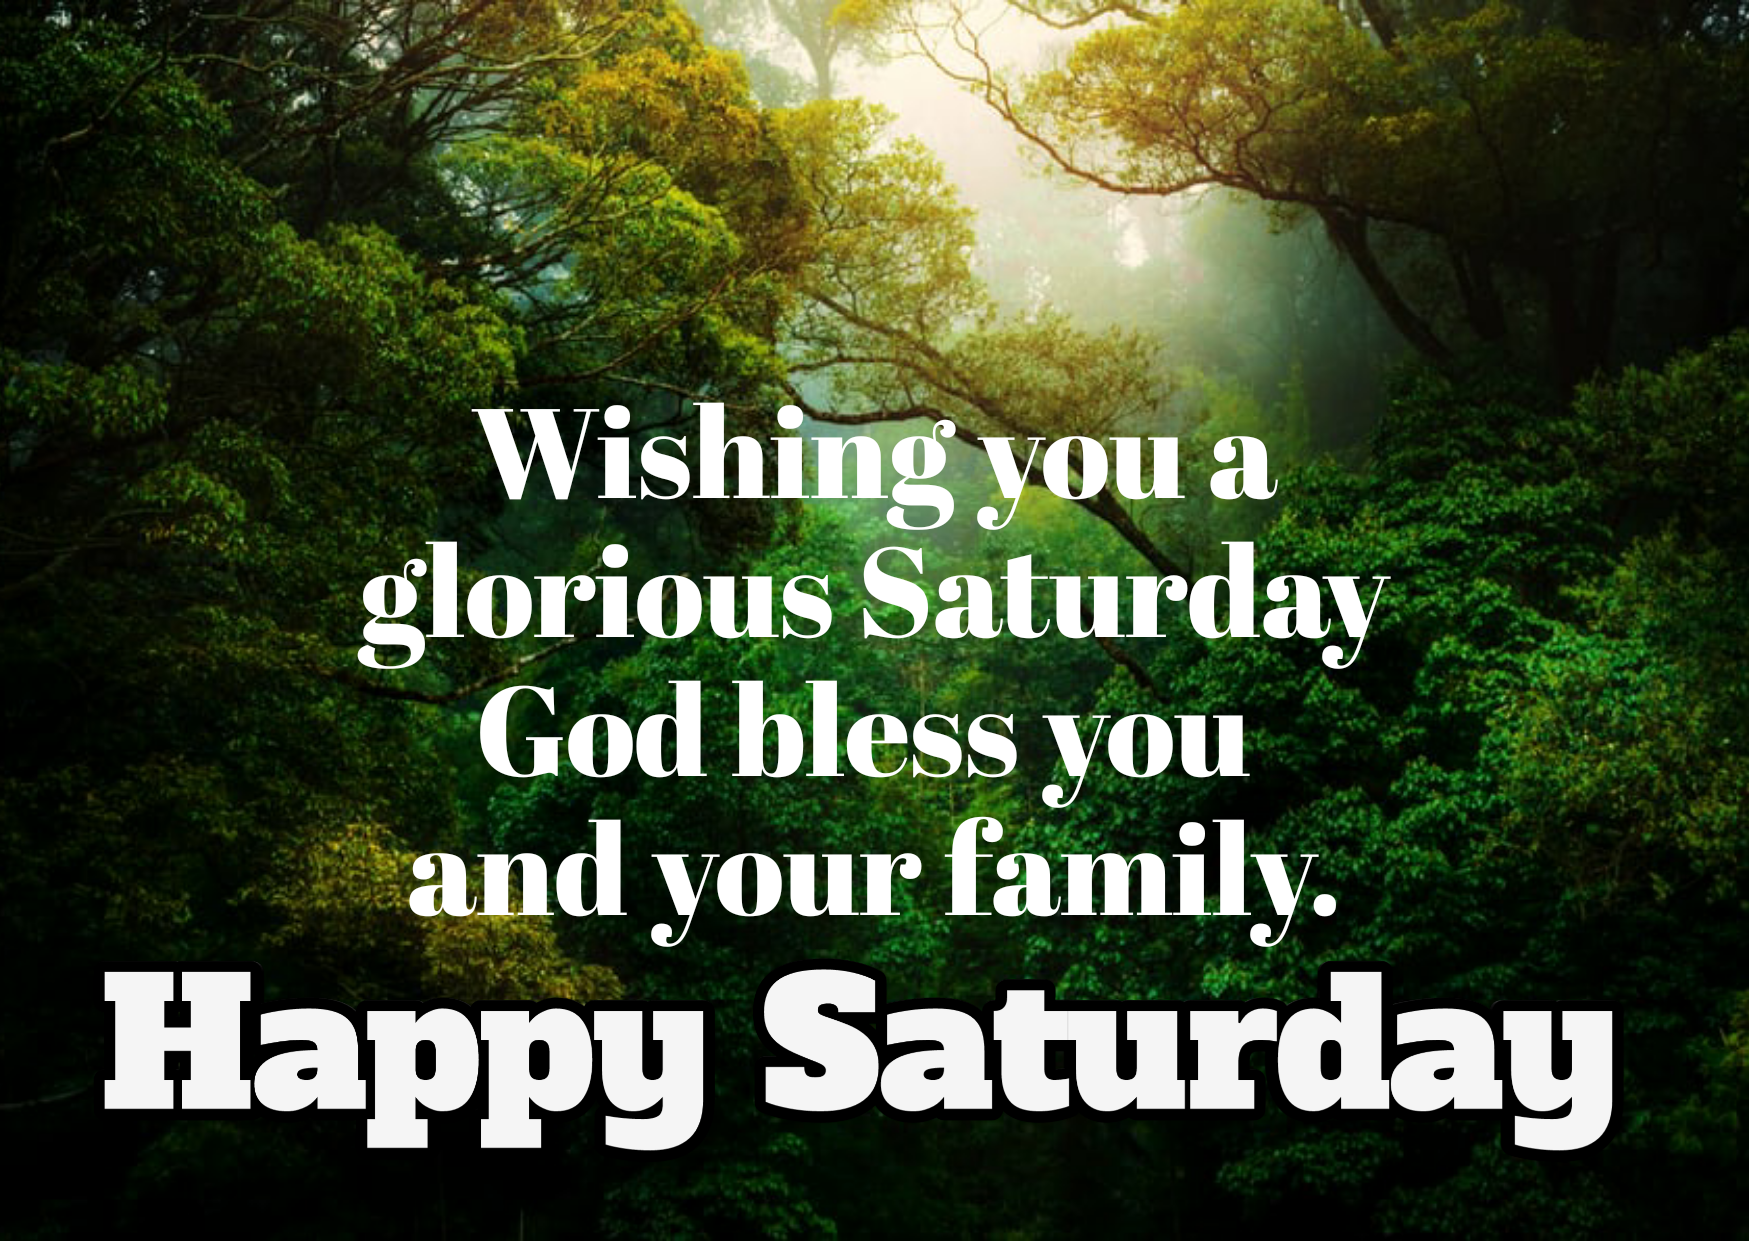 Happy Saturday  Wishes, Images, Wallpaper, Quotes, For Whatsapp, Free download,